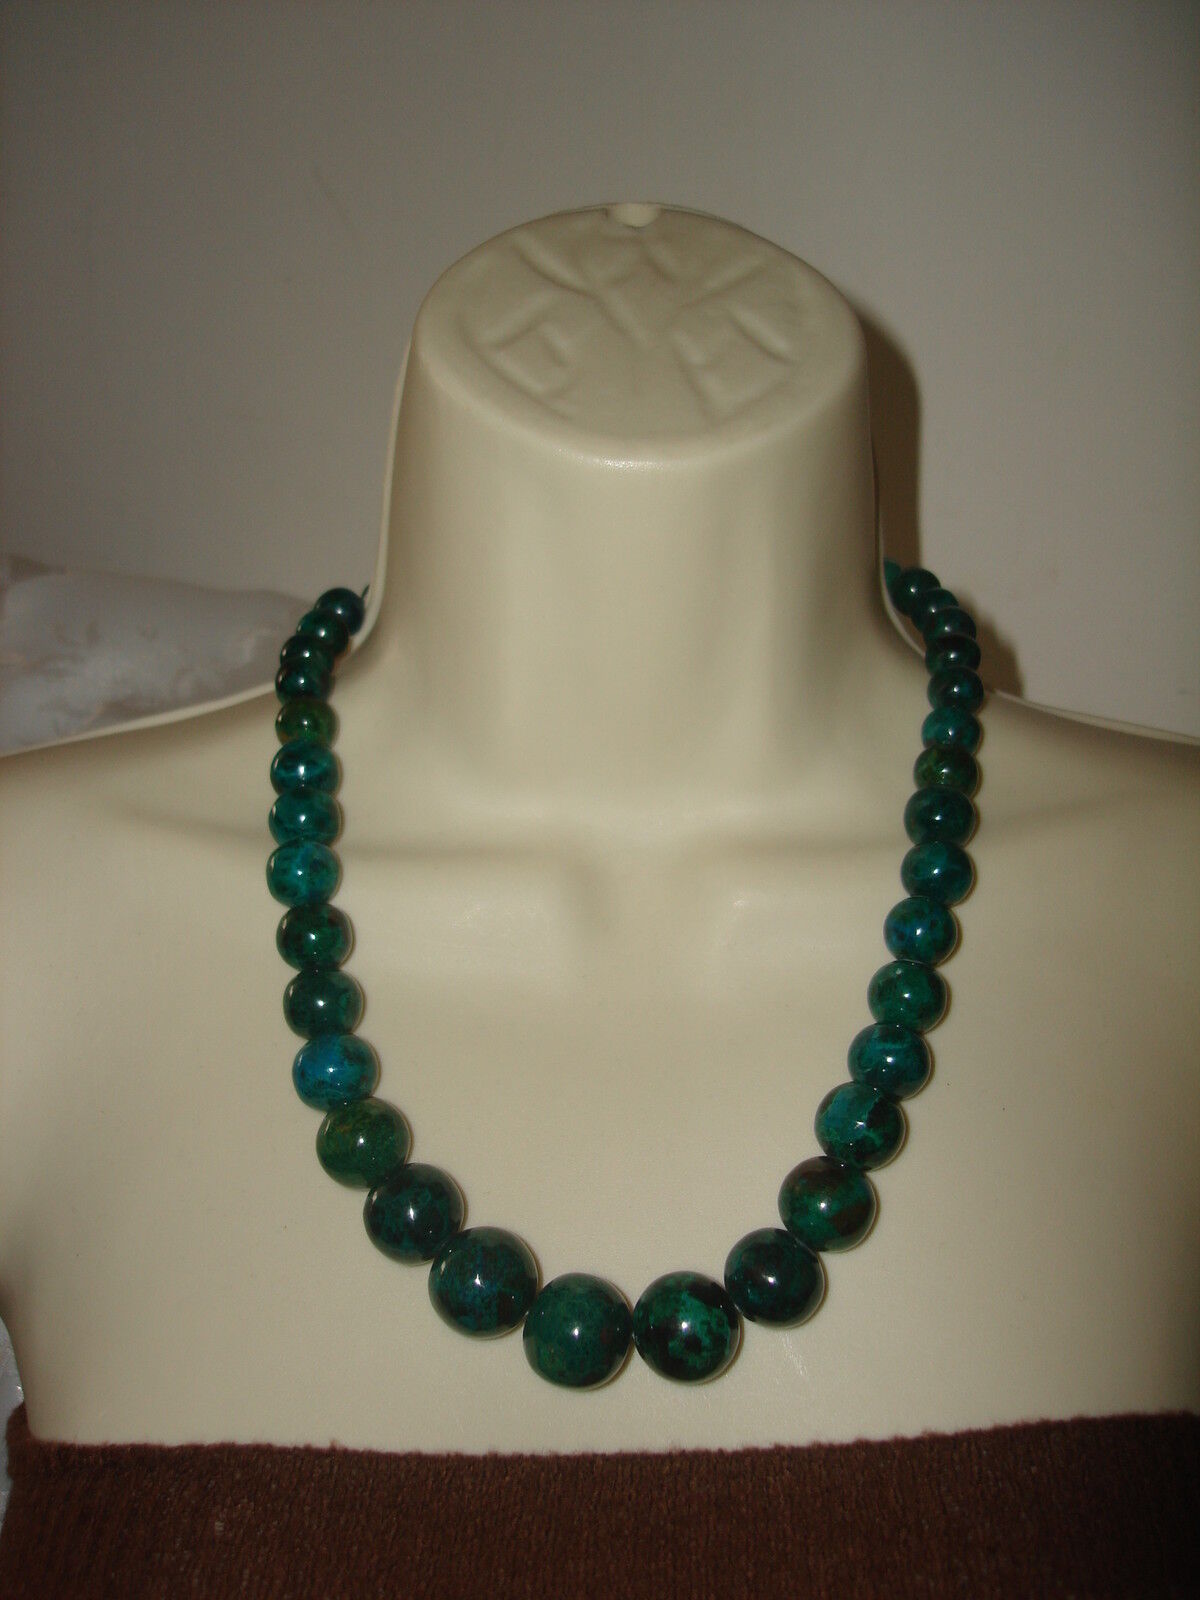 VINTAGE SOLID GREEN TURQUOISE BIG BEADED NECKLACE STERLING SILVER CLOSURE CLASP